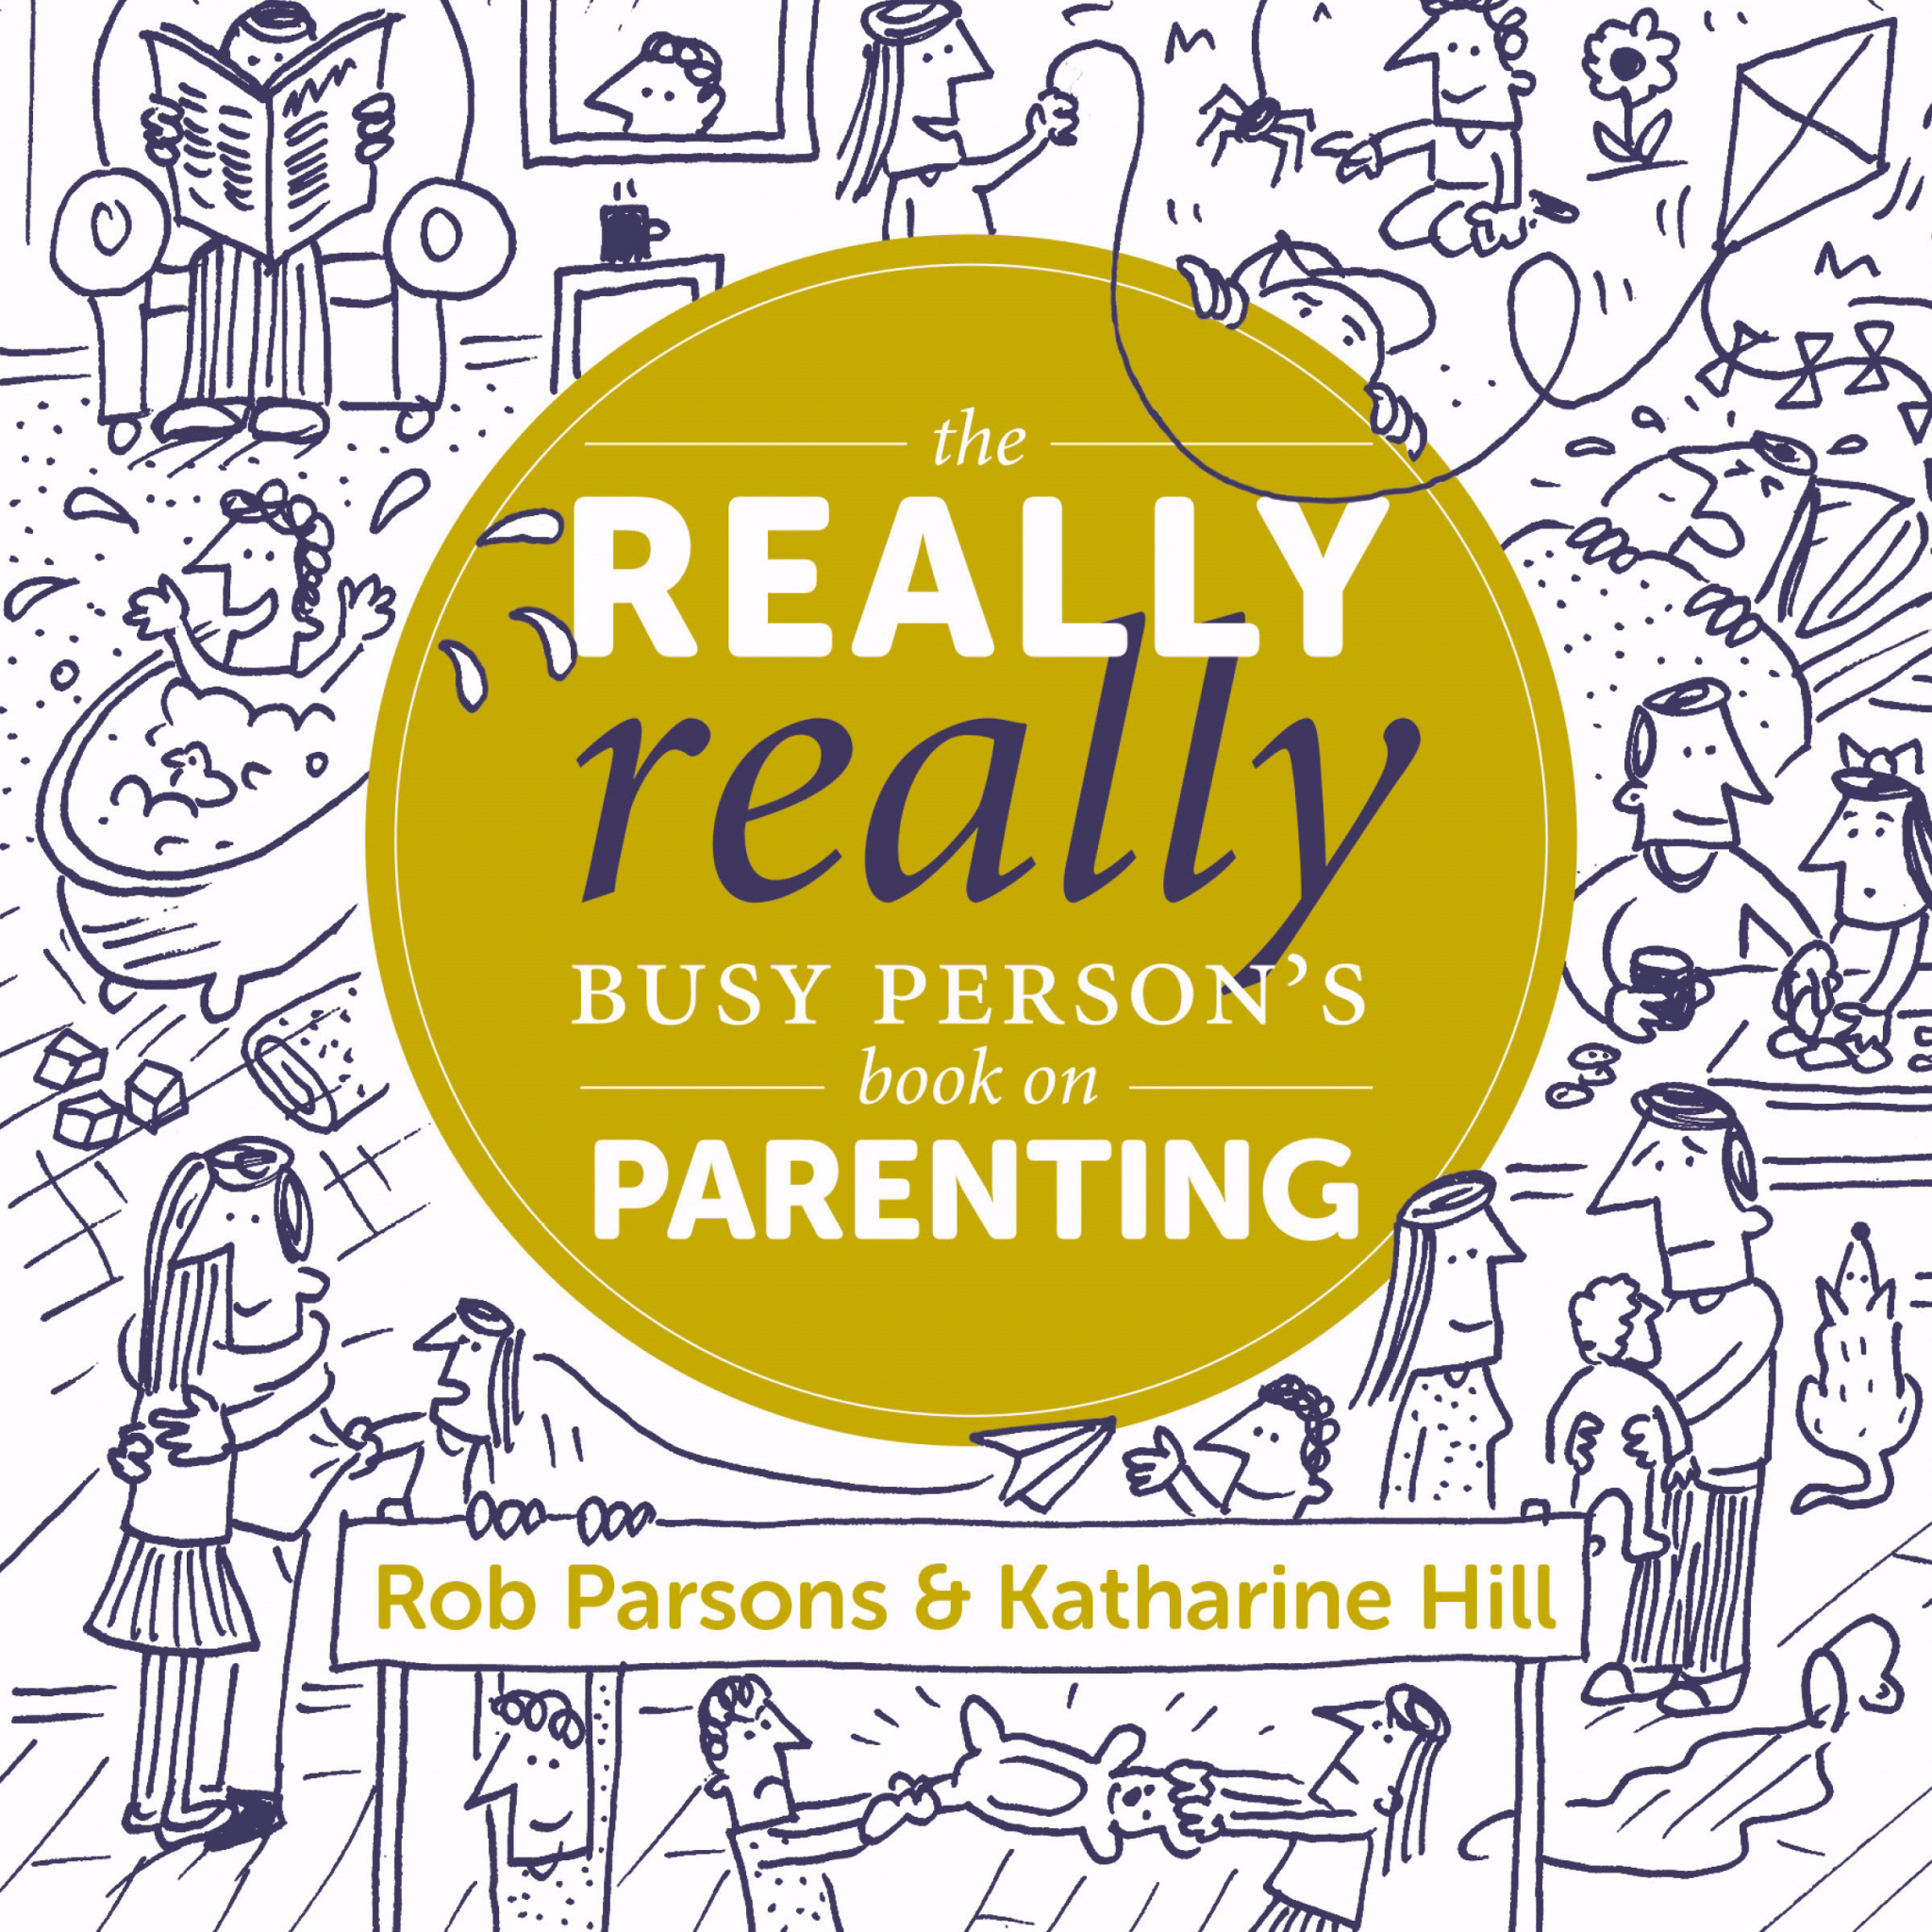 The Really Really Busy Person's Book of Parenting